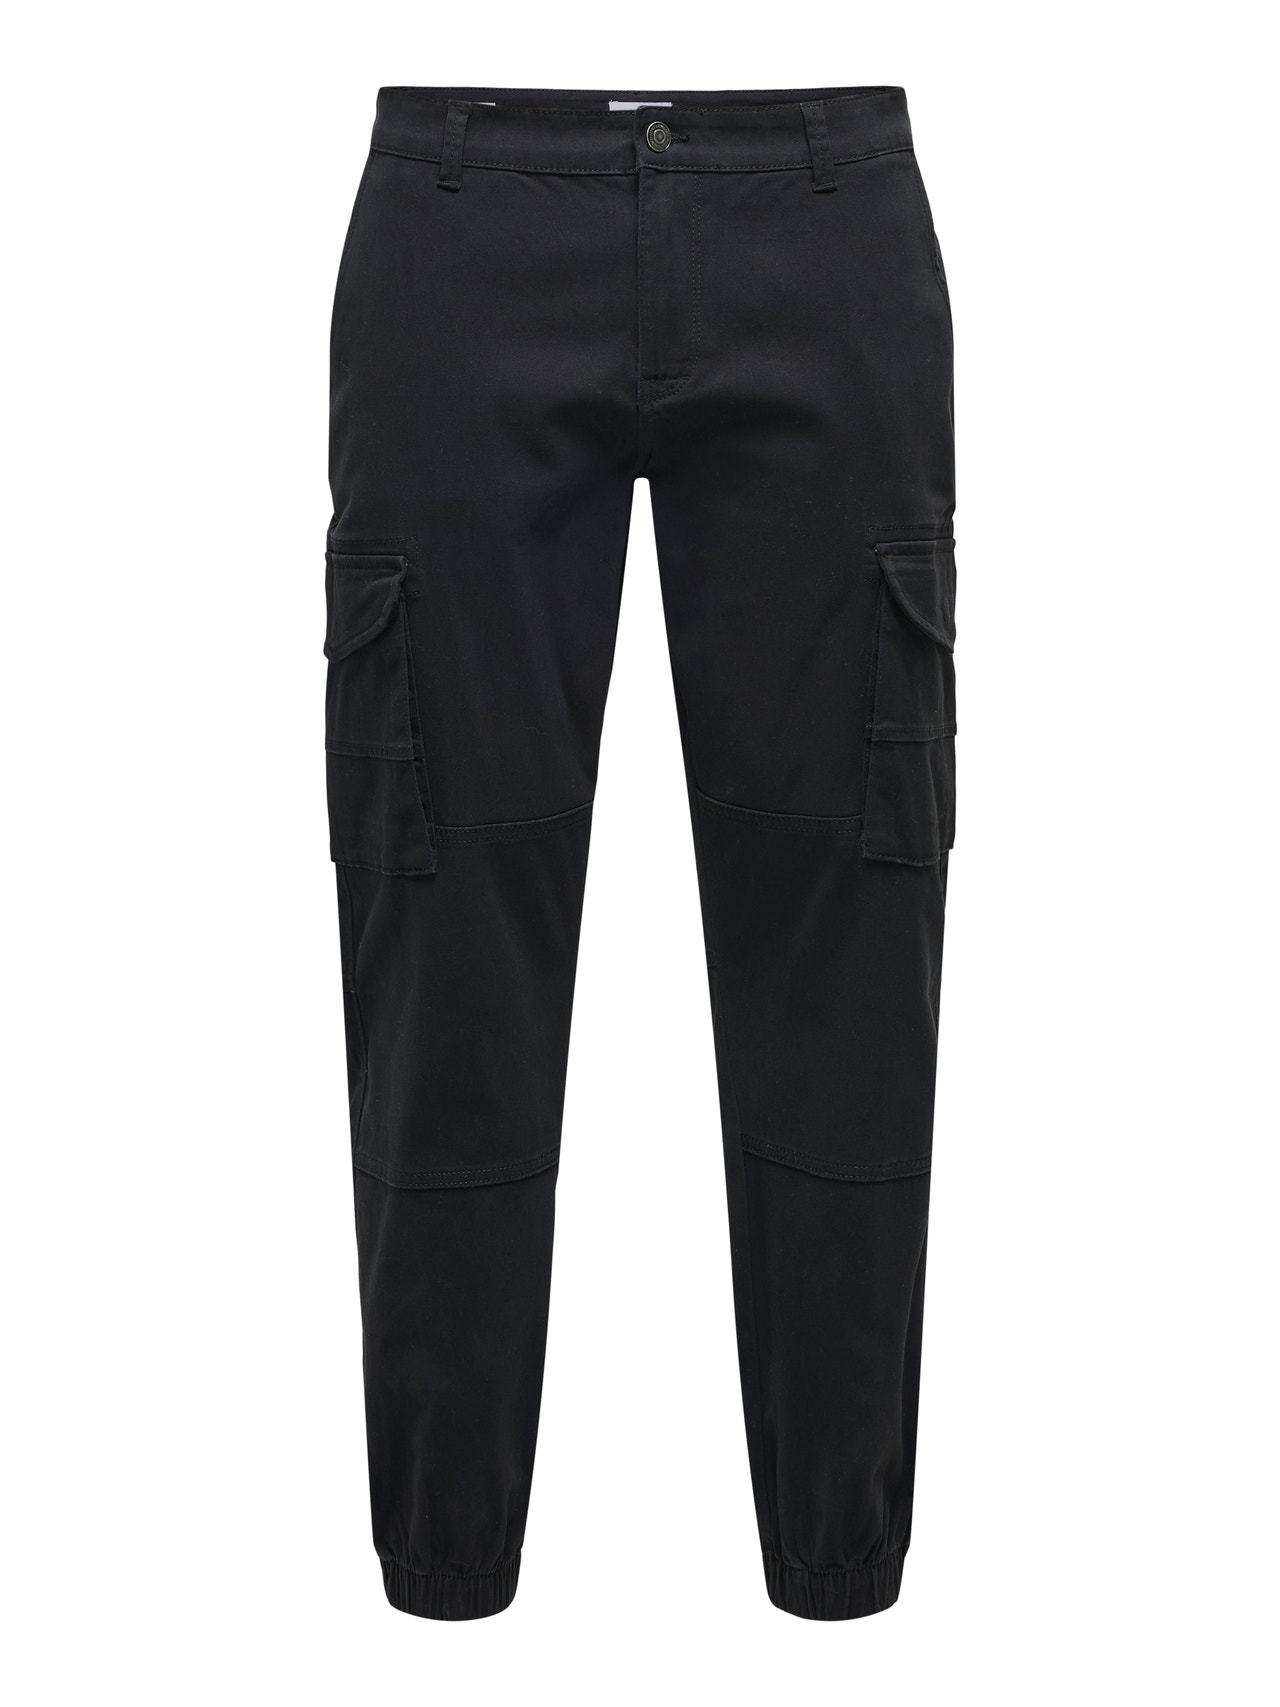 ONLY & SONS Classic cargo trousers -Black - 22028434